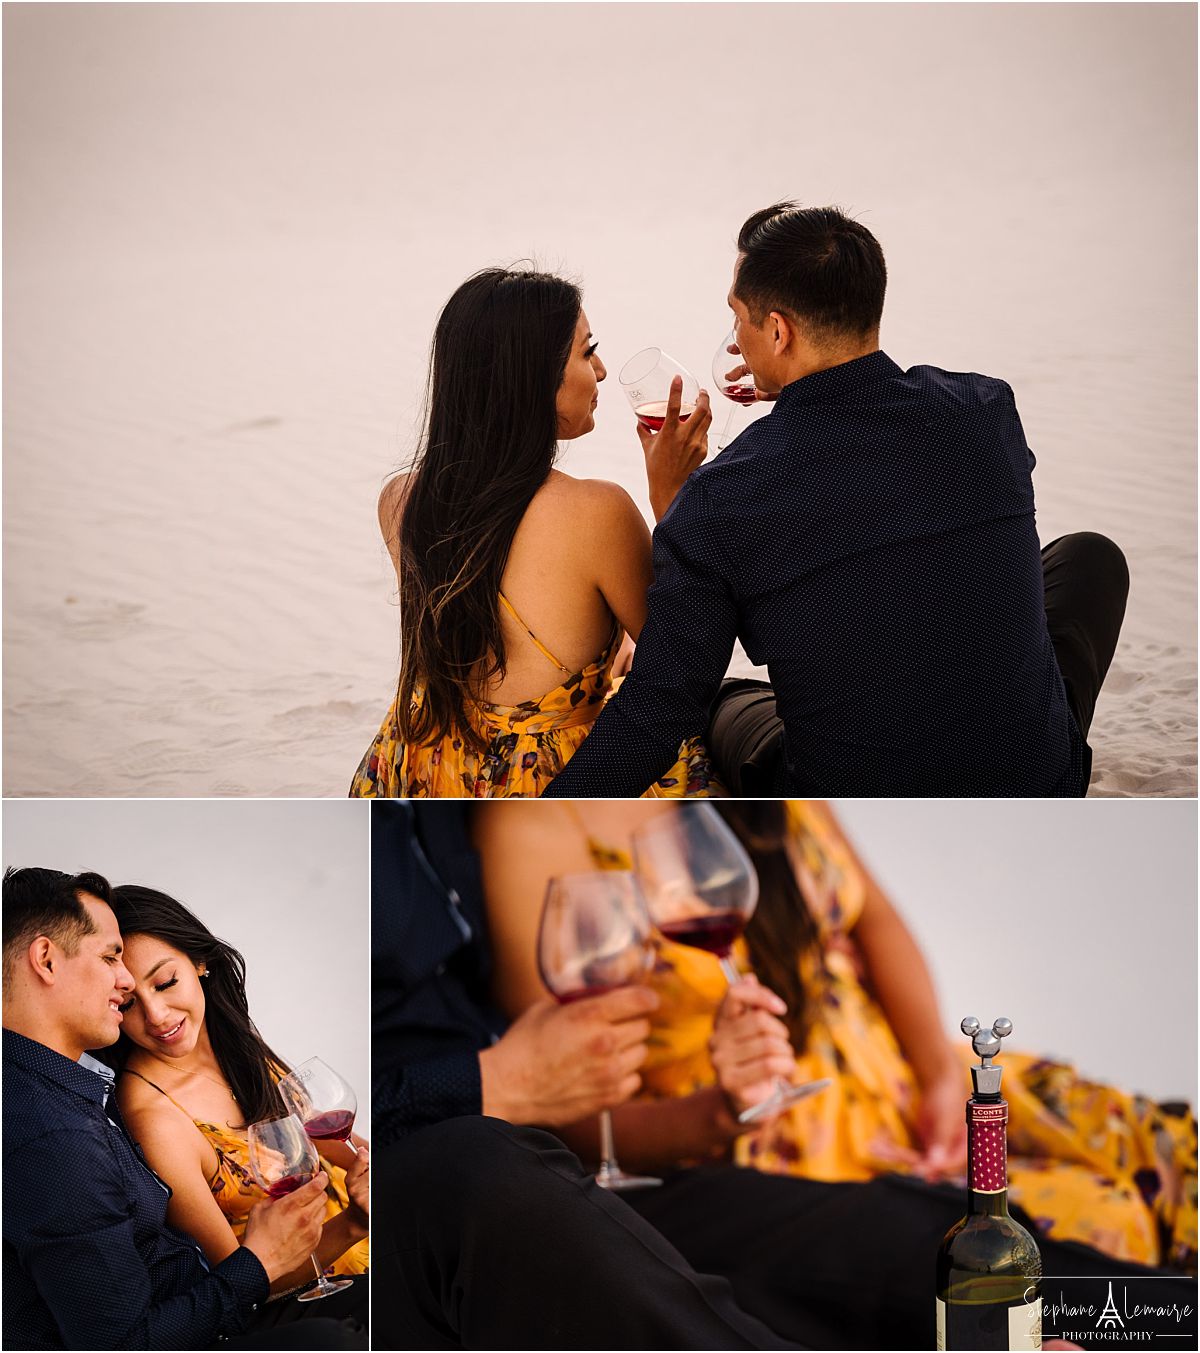 Couple with champagne in white sands New Mexico , photographed by Stephane Lemaire.